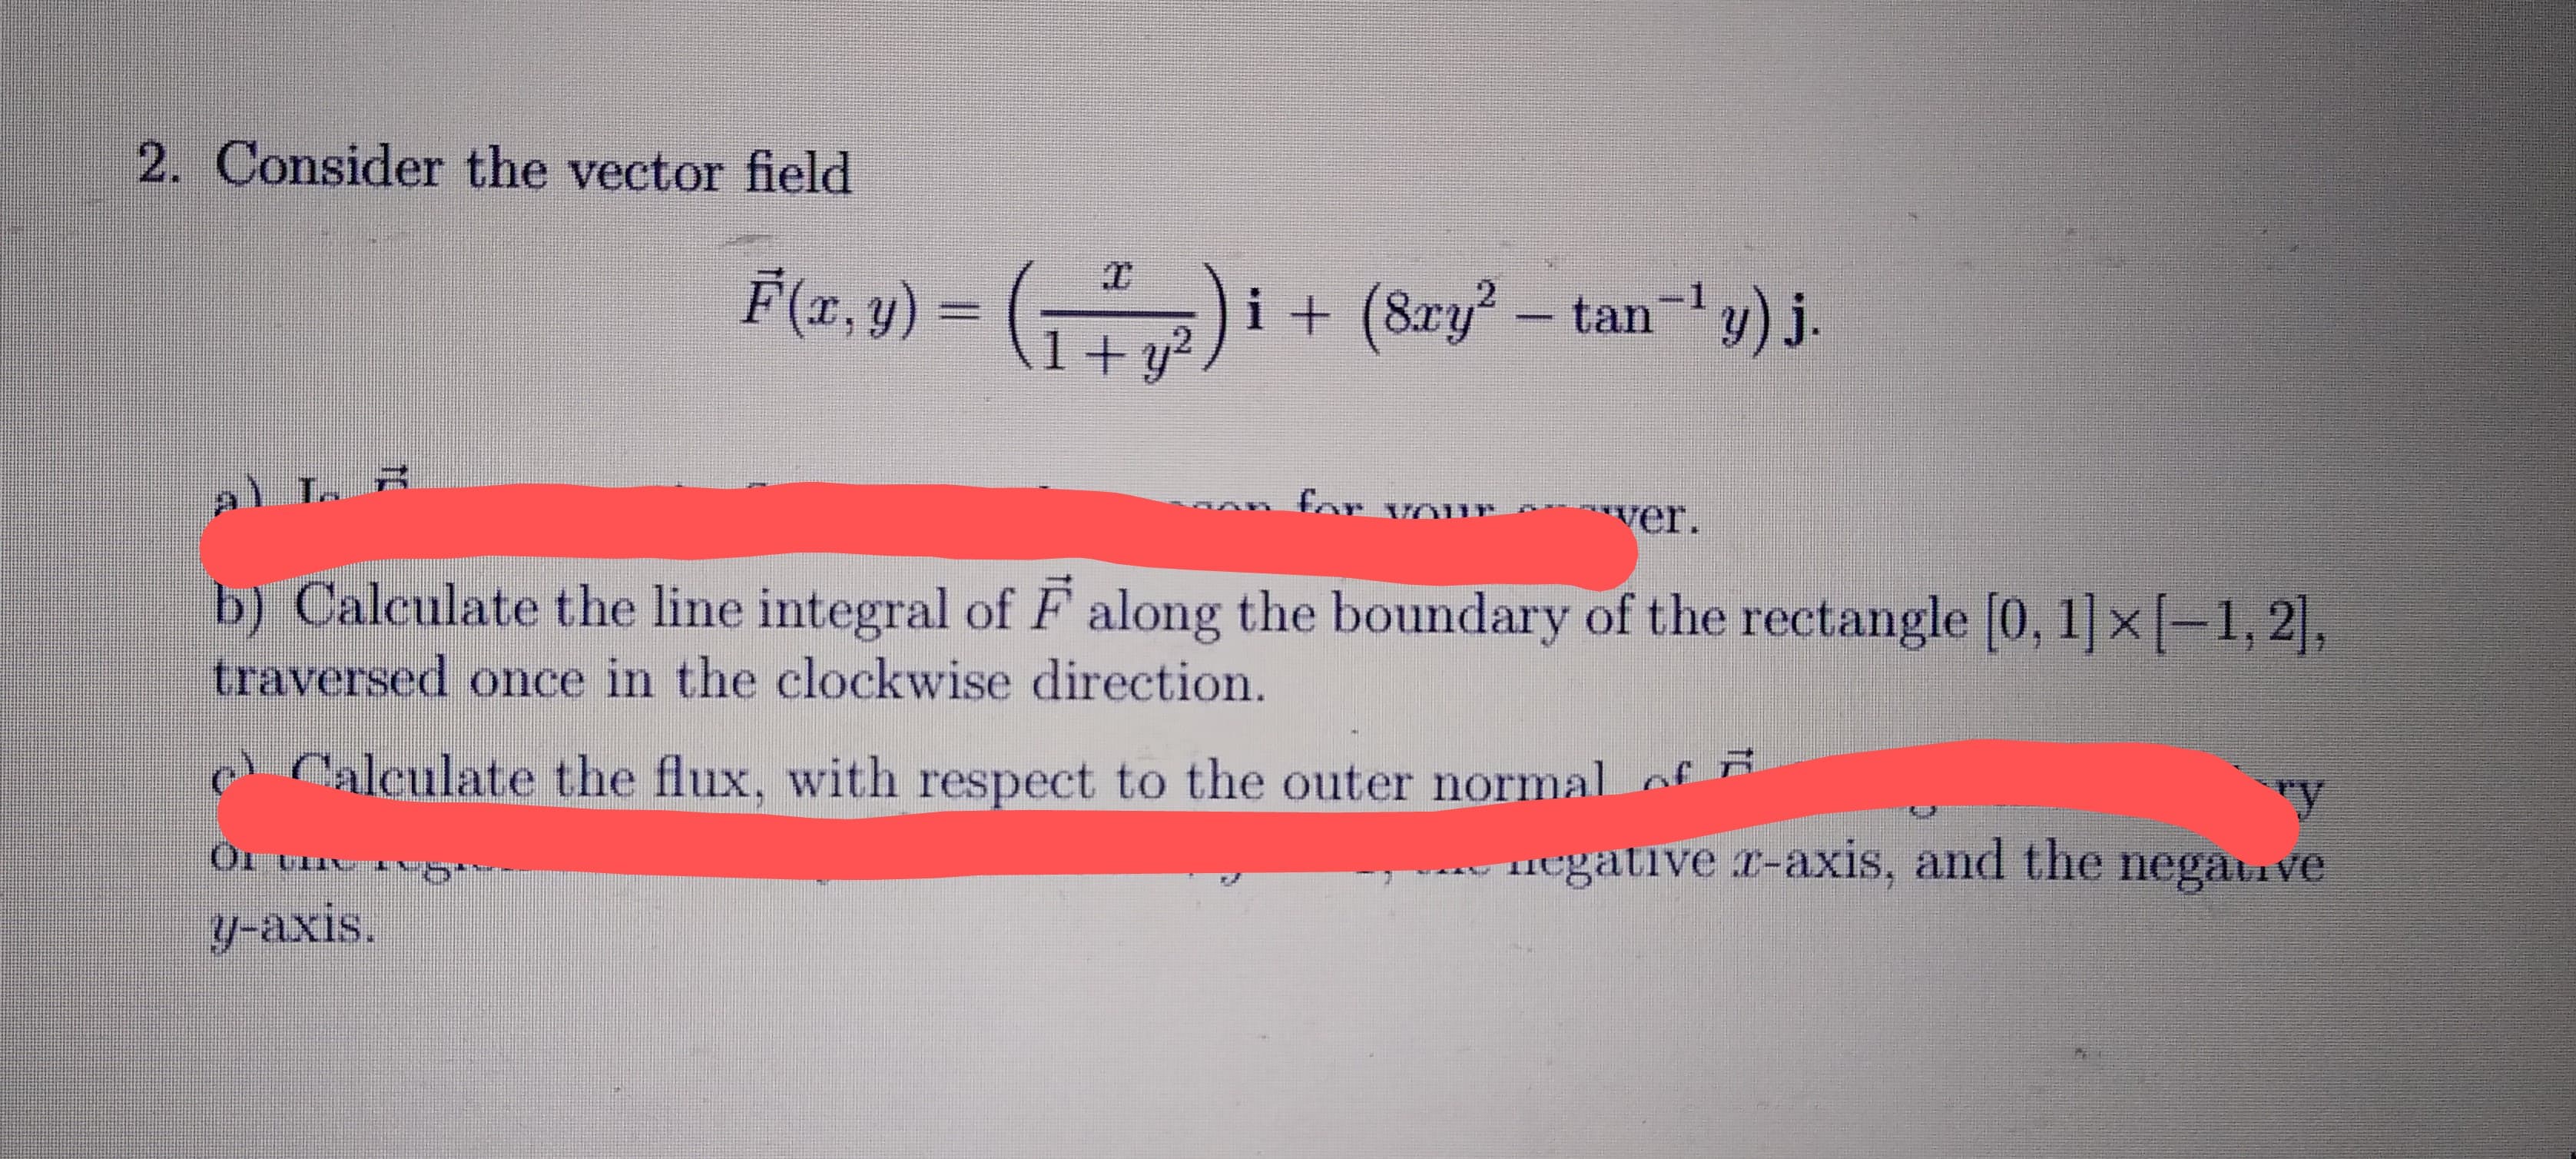 b) Calculate the line integral of F along the boundary of the rectangle [0, 1 x[-1, 2],
traversed once in the clockwise direction.
